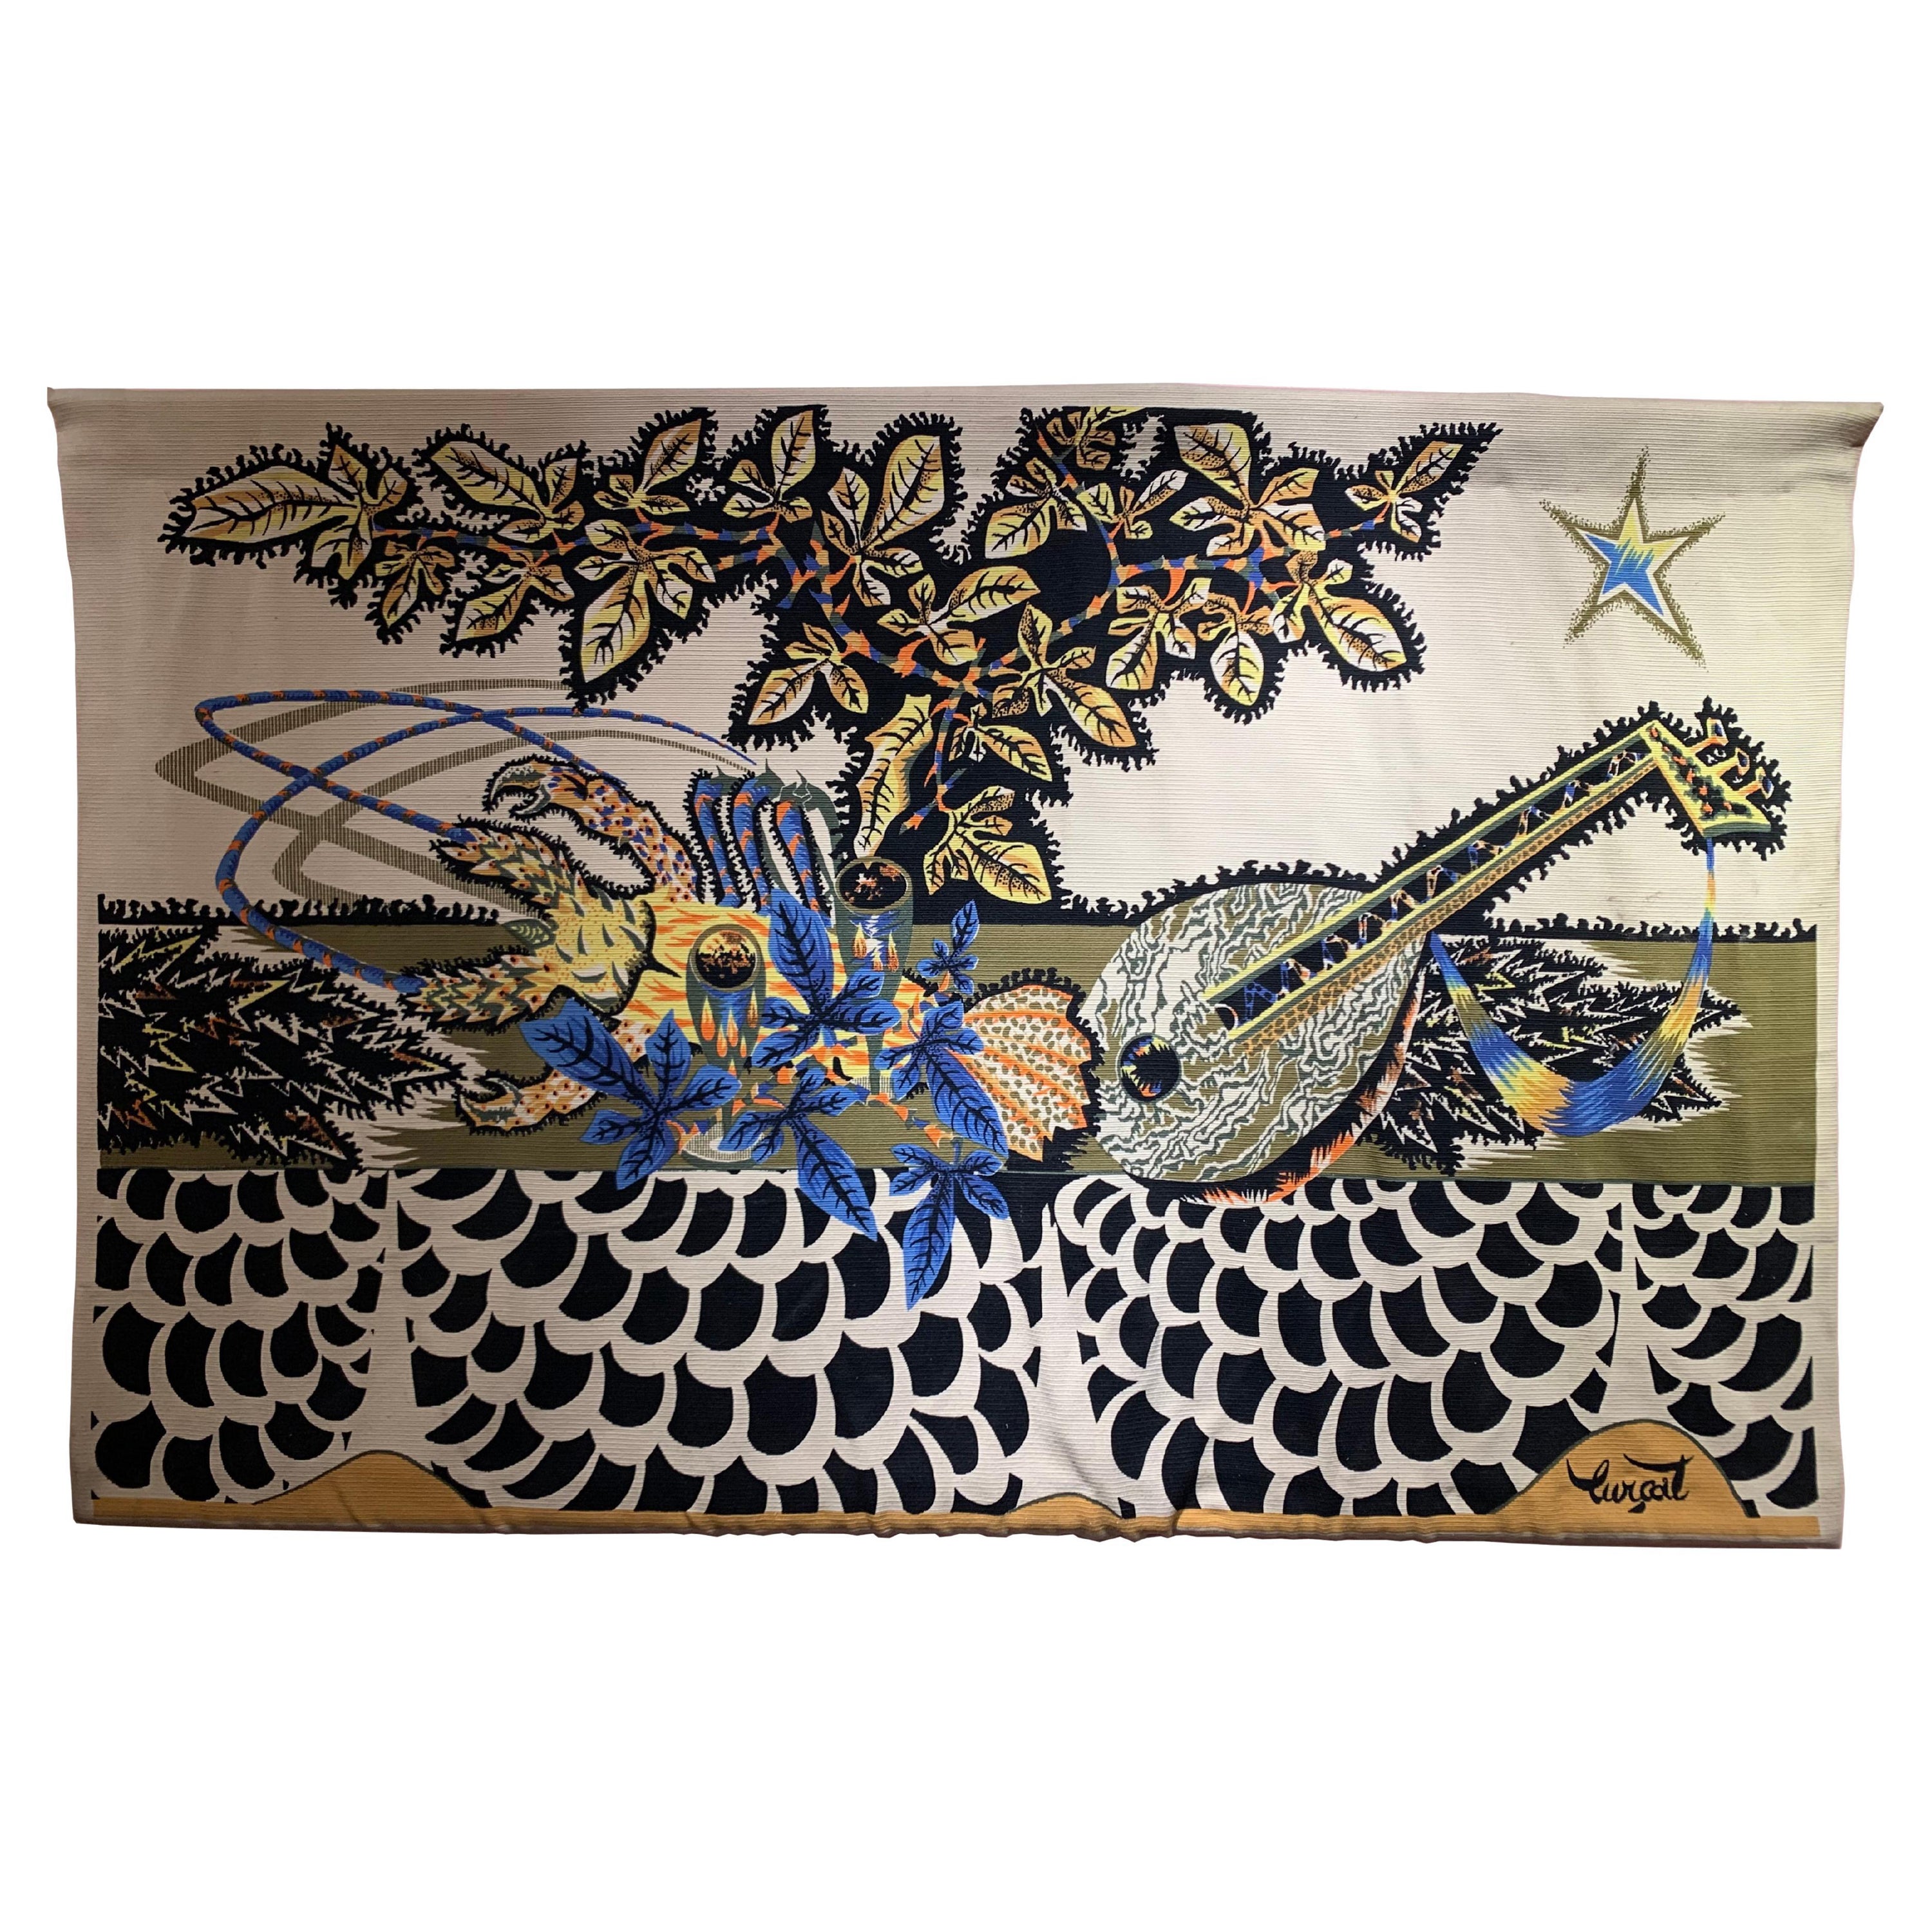 Midcentury Tapestry "La Table" Signed by Jean Lurcat For Sale